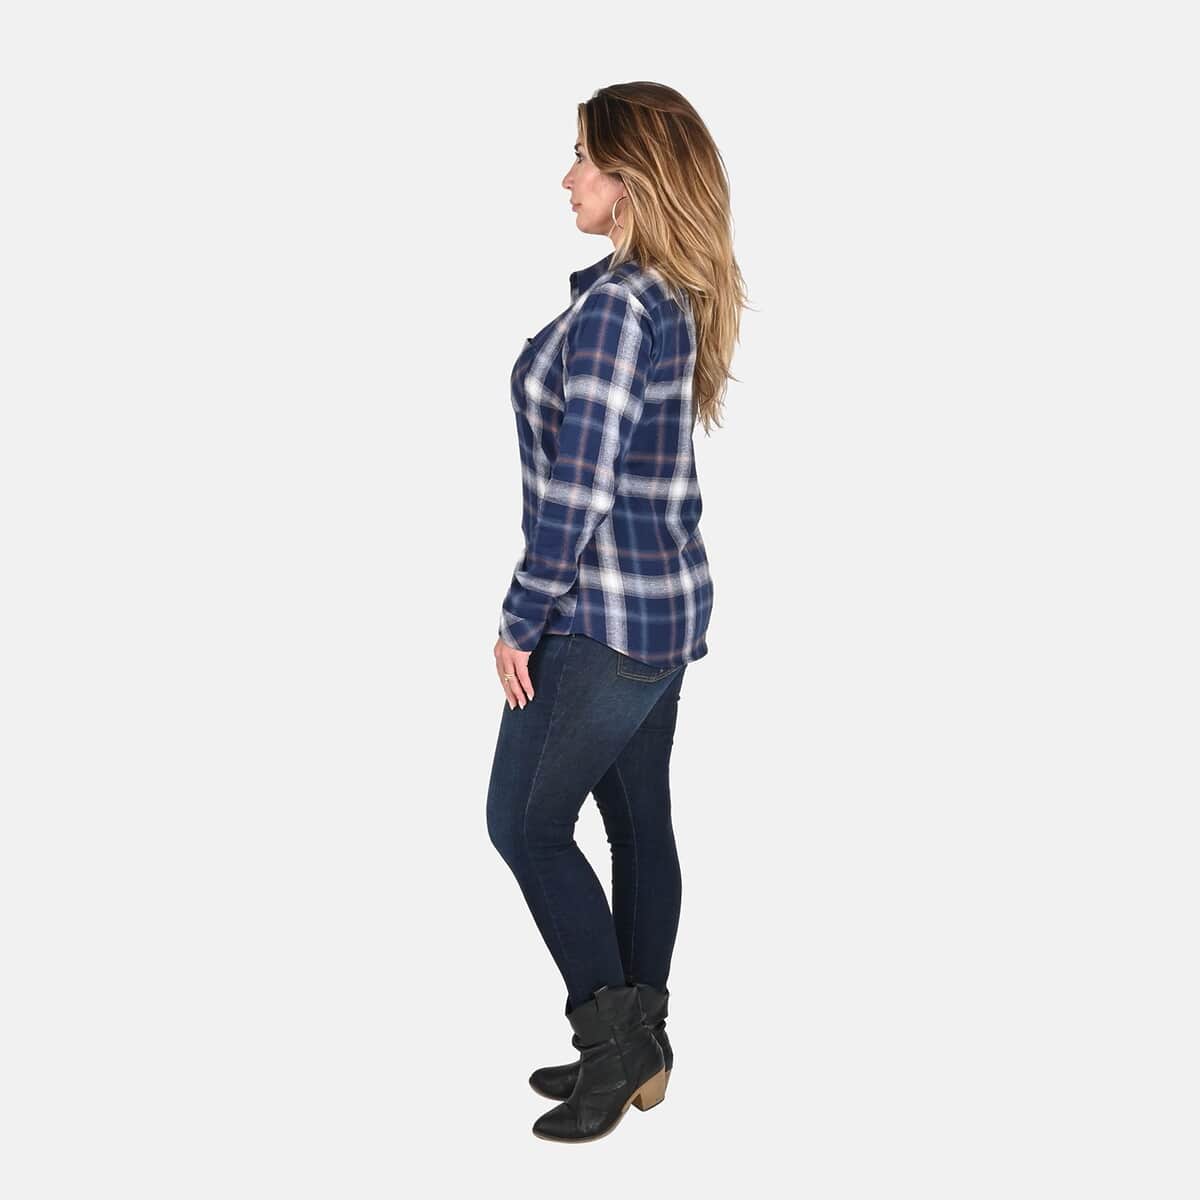 Victory Sportswear Blue and White Plaid Pattern Cotton Flannel Shirt - S image number 2